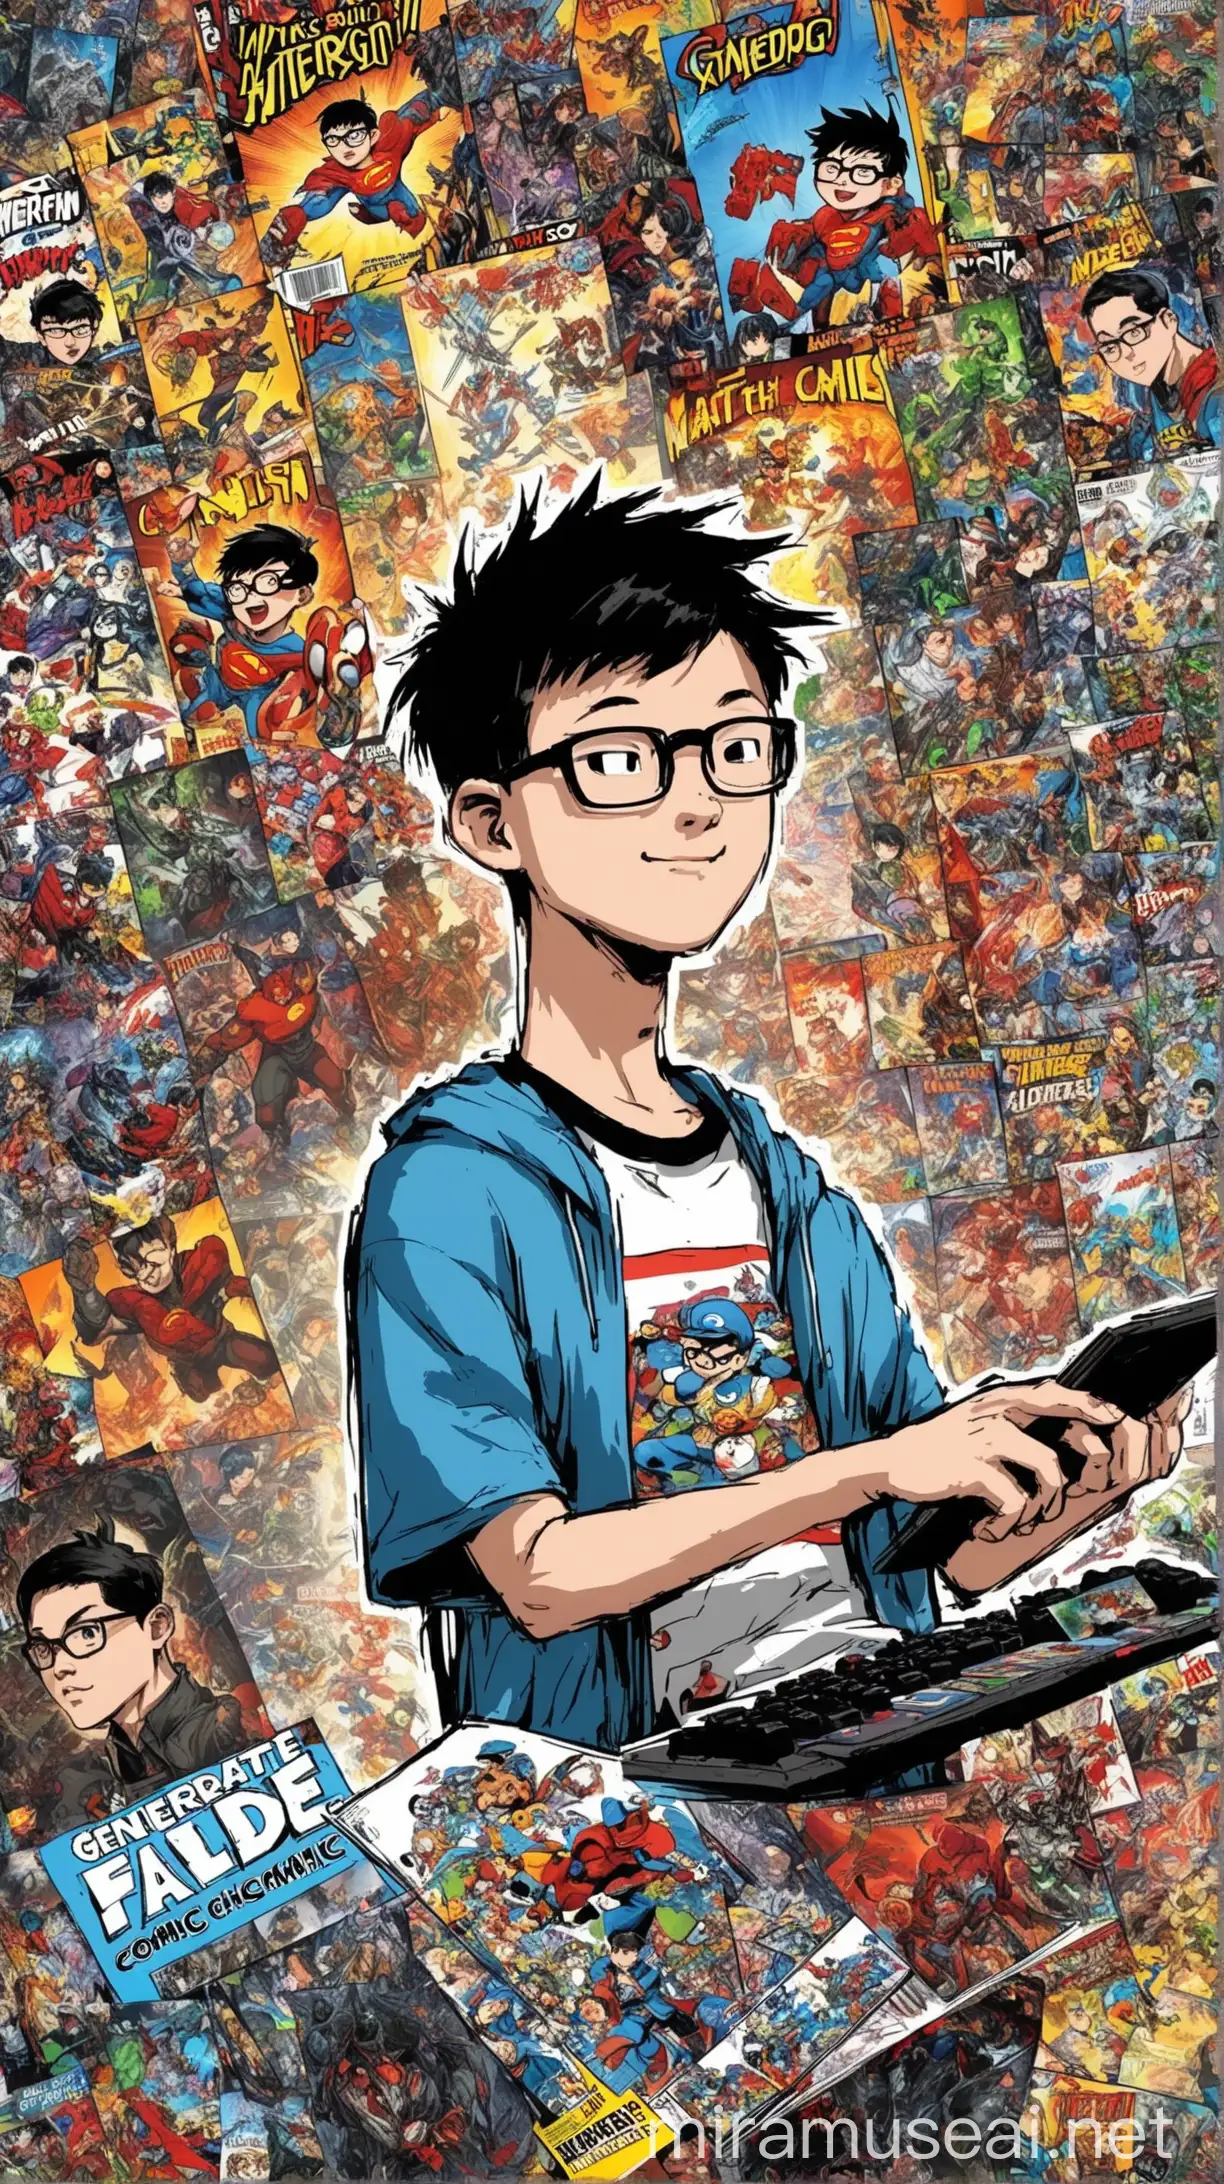  using mixed media generate, A nerdy stereotypical popular chinese kid from chicago with a low taper fade hair cut, that loves comics, video games, anime, match and music, and make his interests and hobbies individual images